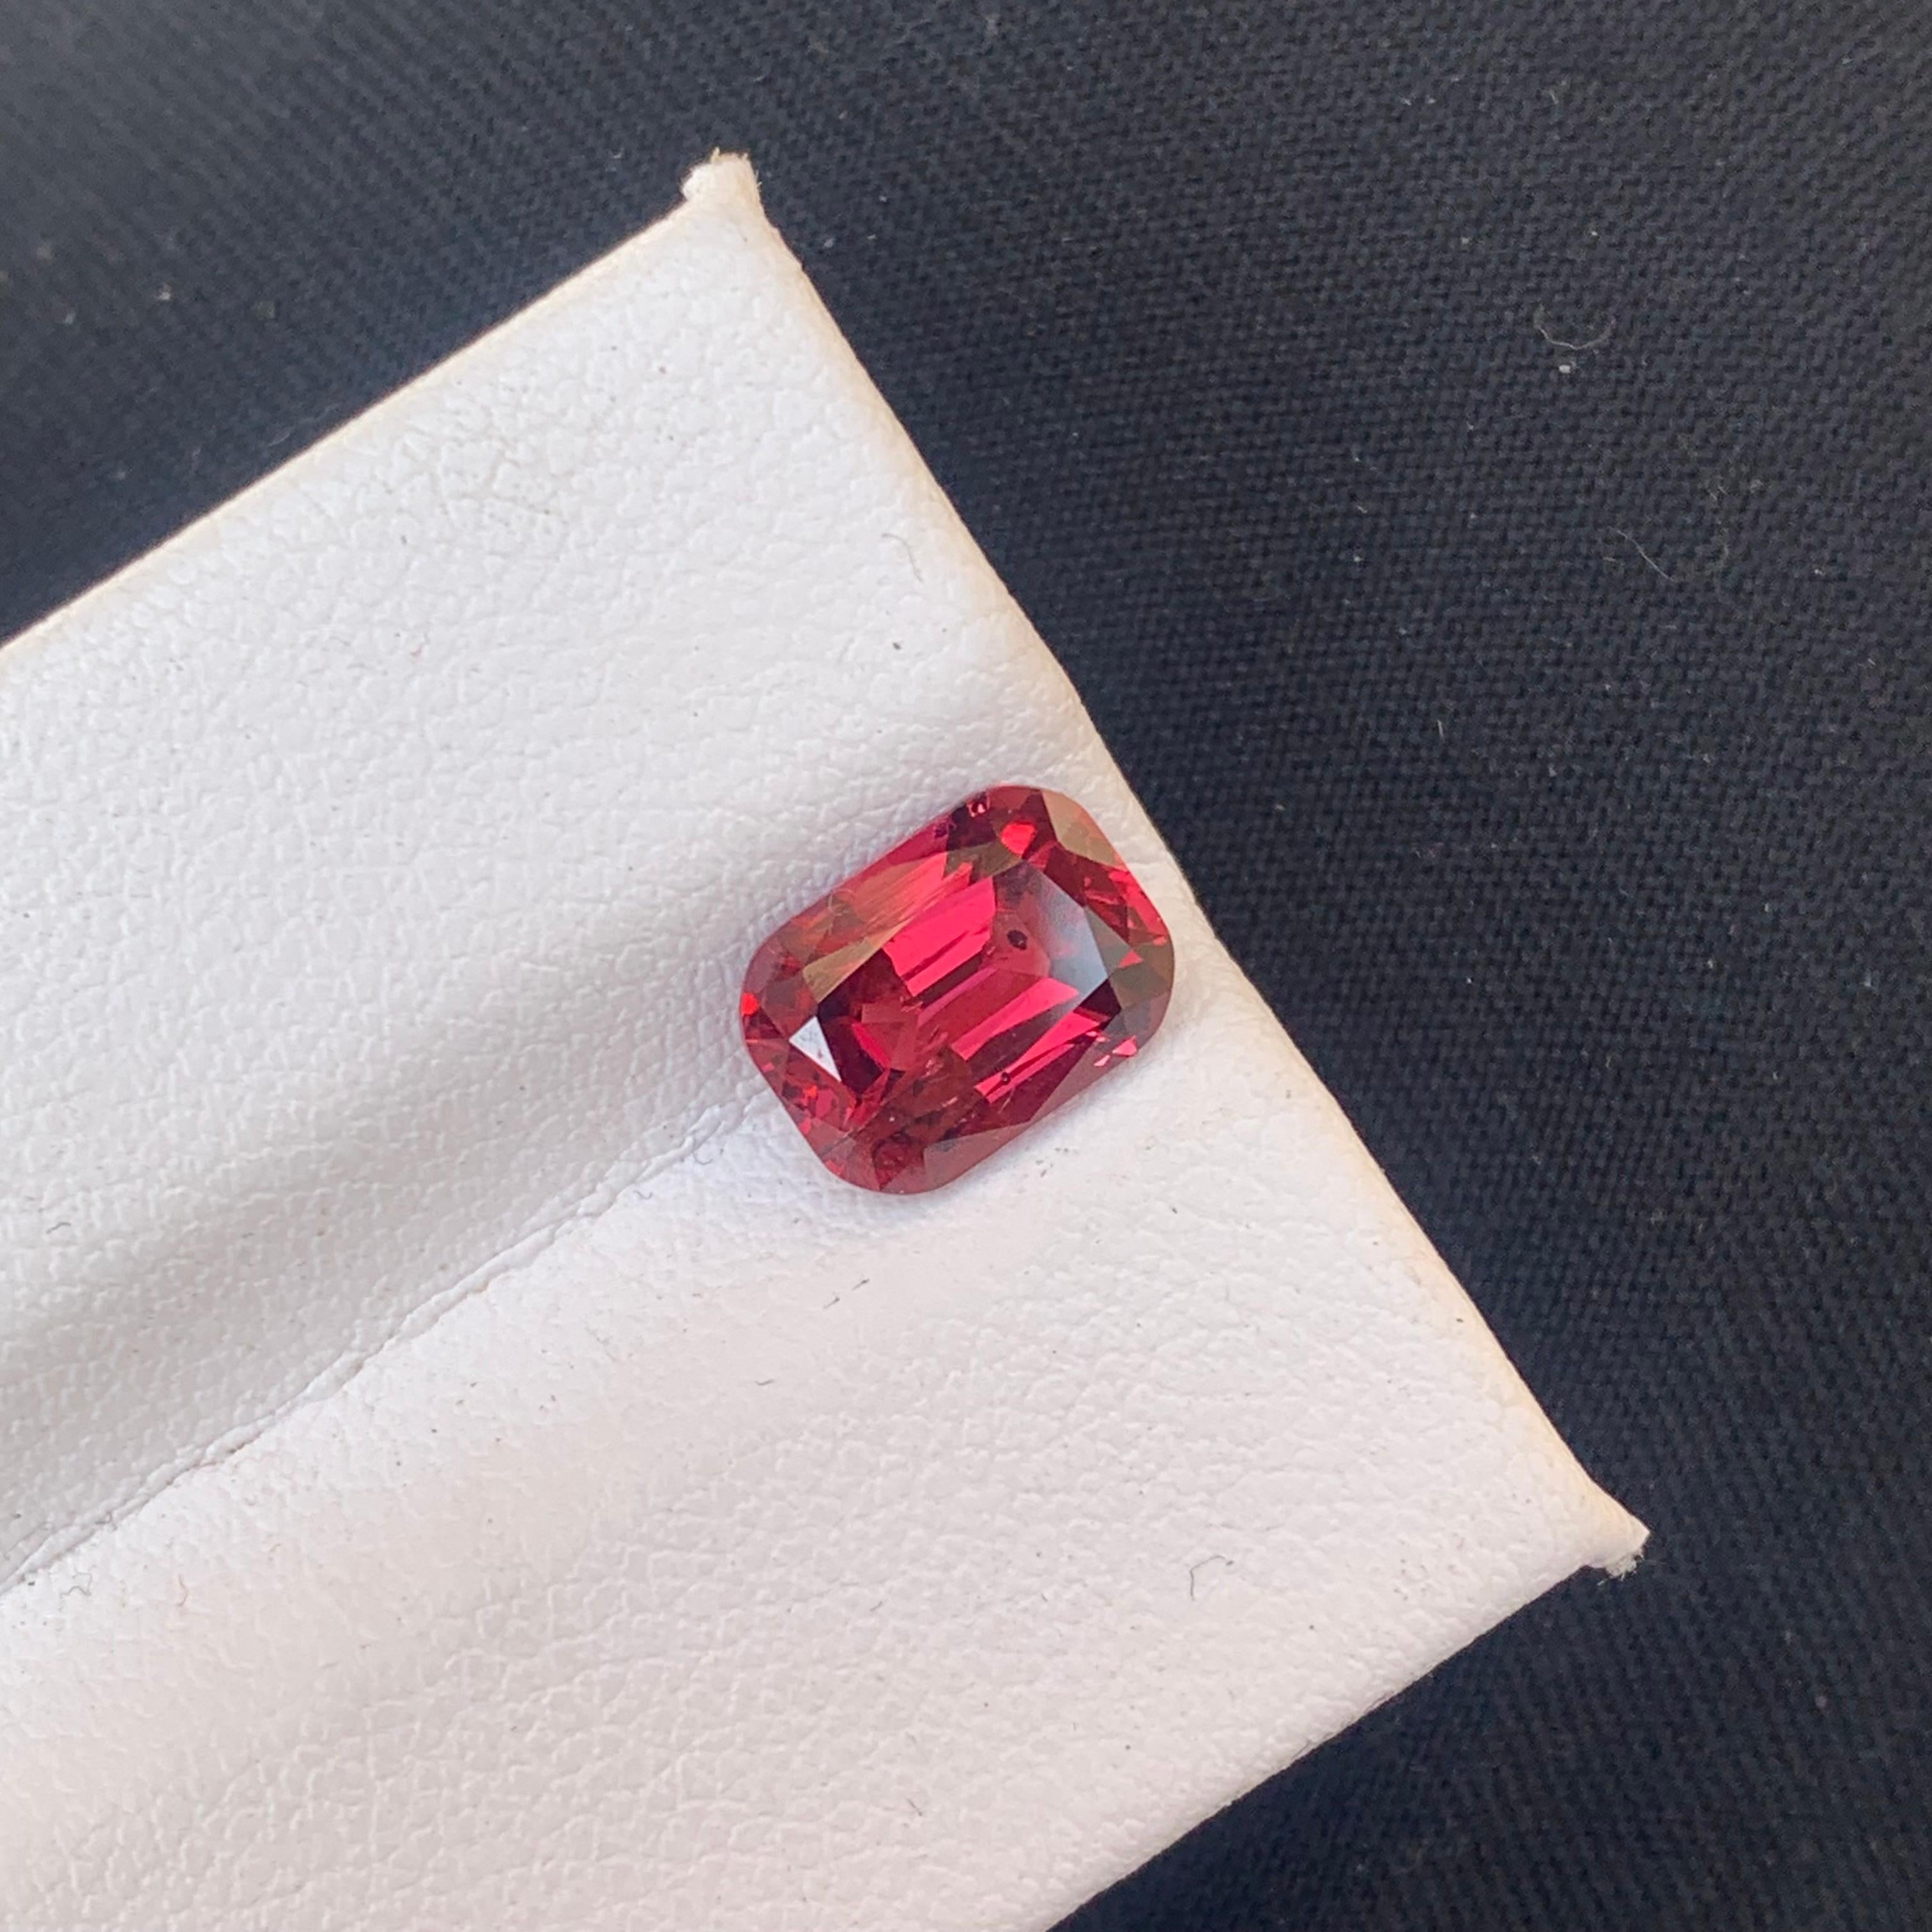 Loose Rhodolite Garnet
Weight : 2.45 Carats
Dimensions : 8.6x6.3x4.7 Mm
Origin : Tanzania Africa
Clarity : SI
Shape: Long Cushion
Cut: Cushion
Certificate: On Demand
Treatment: Non
Color: Red
Rhodolite is a mixture of pyrope and almandite garnets.